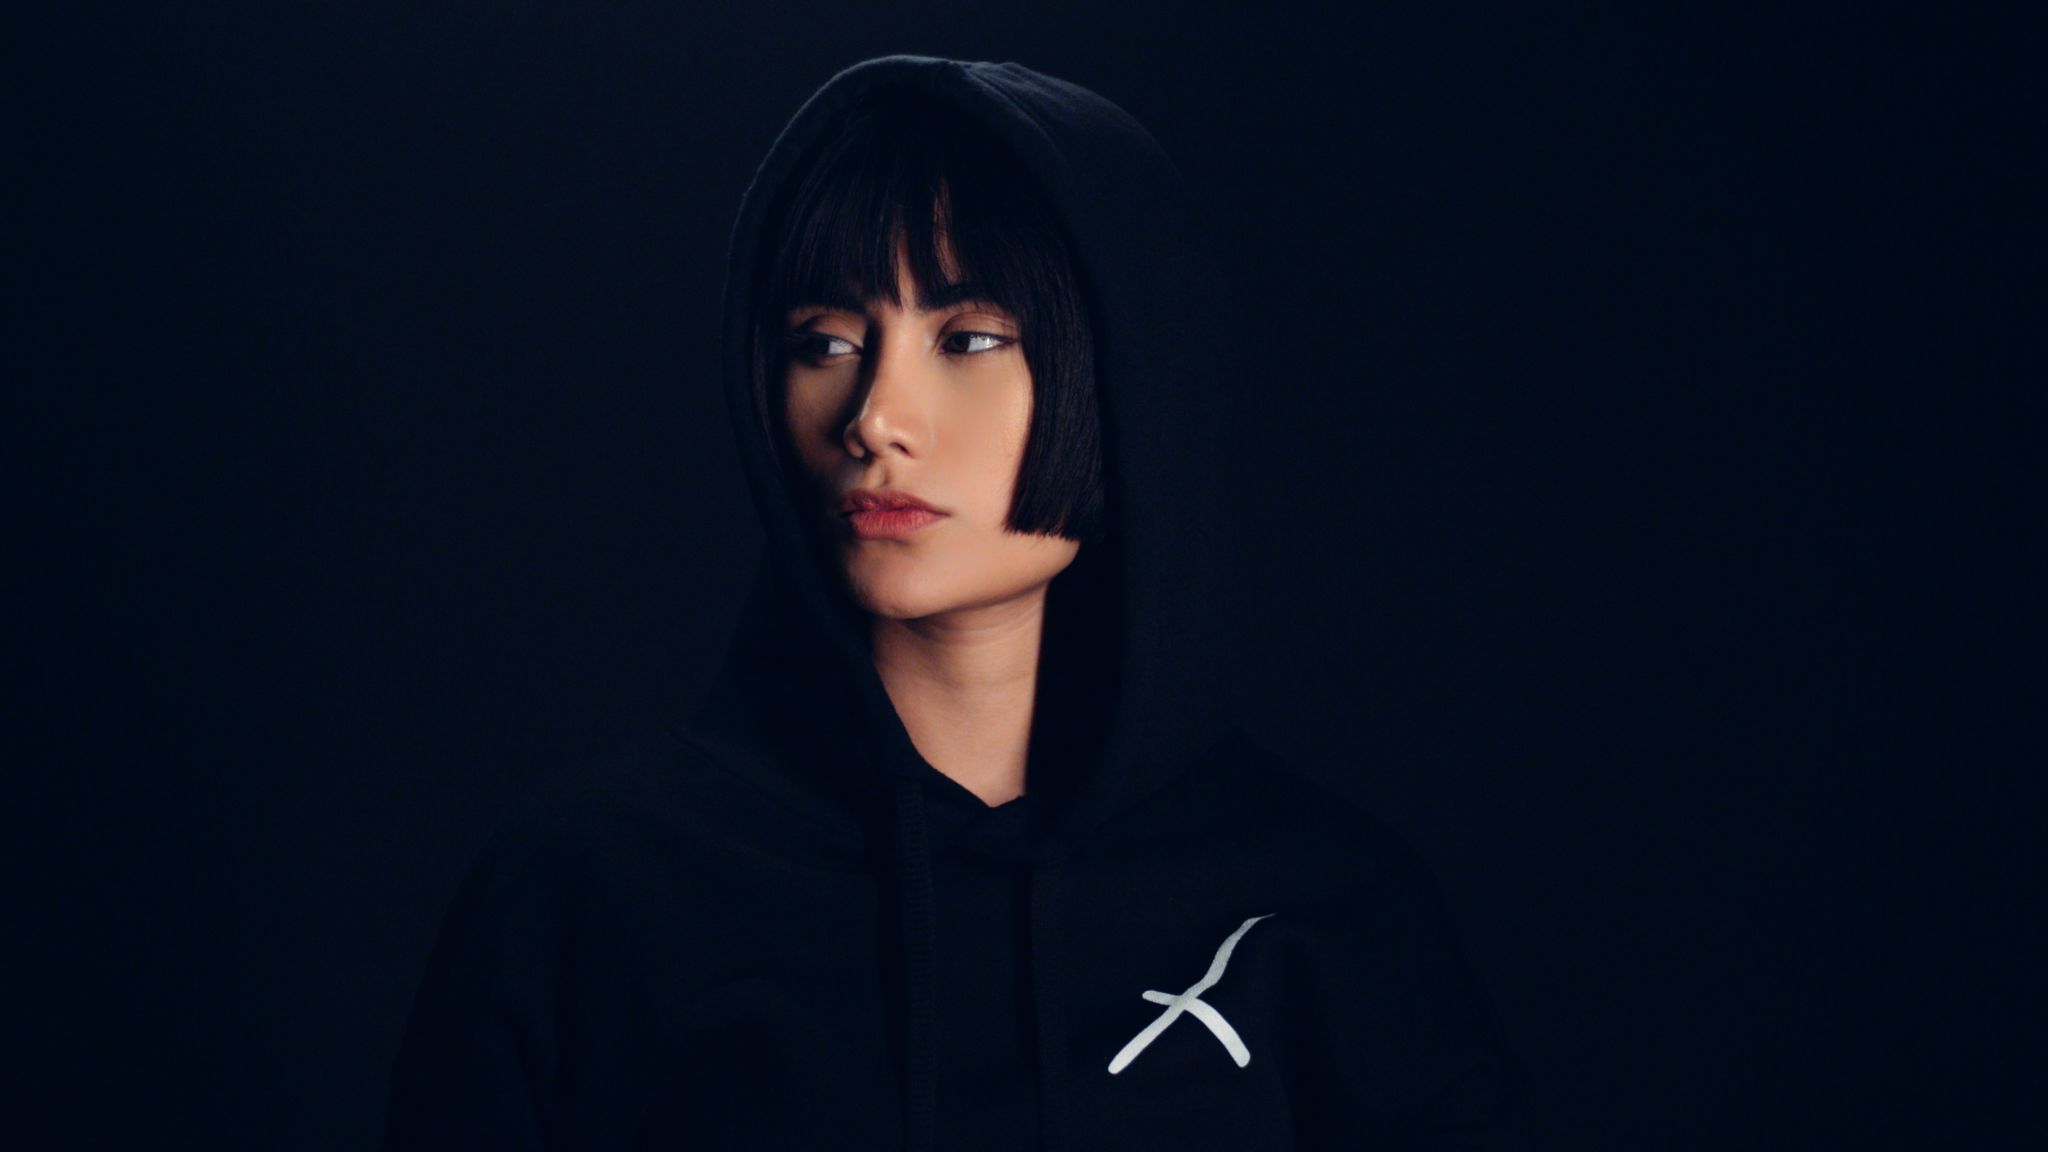 Female Model with short hair posing for the camera in darkness looking off to the side wearing a black sweatshirt with white Uncreative logo